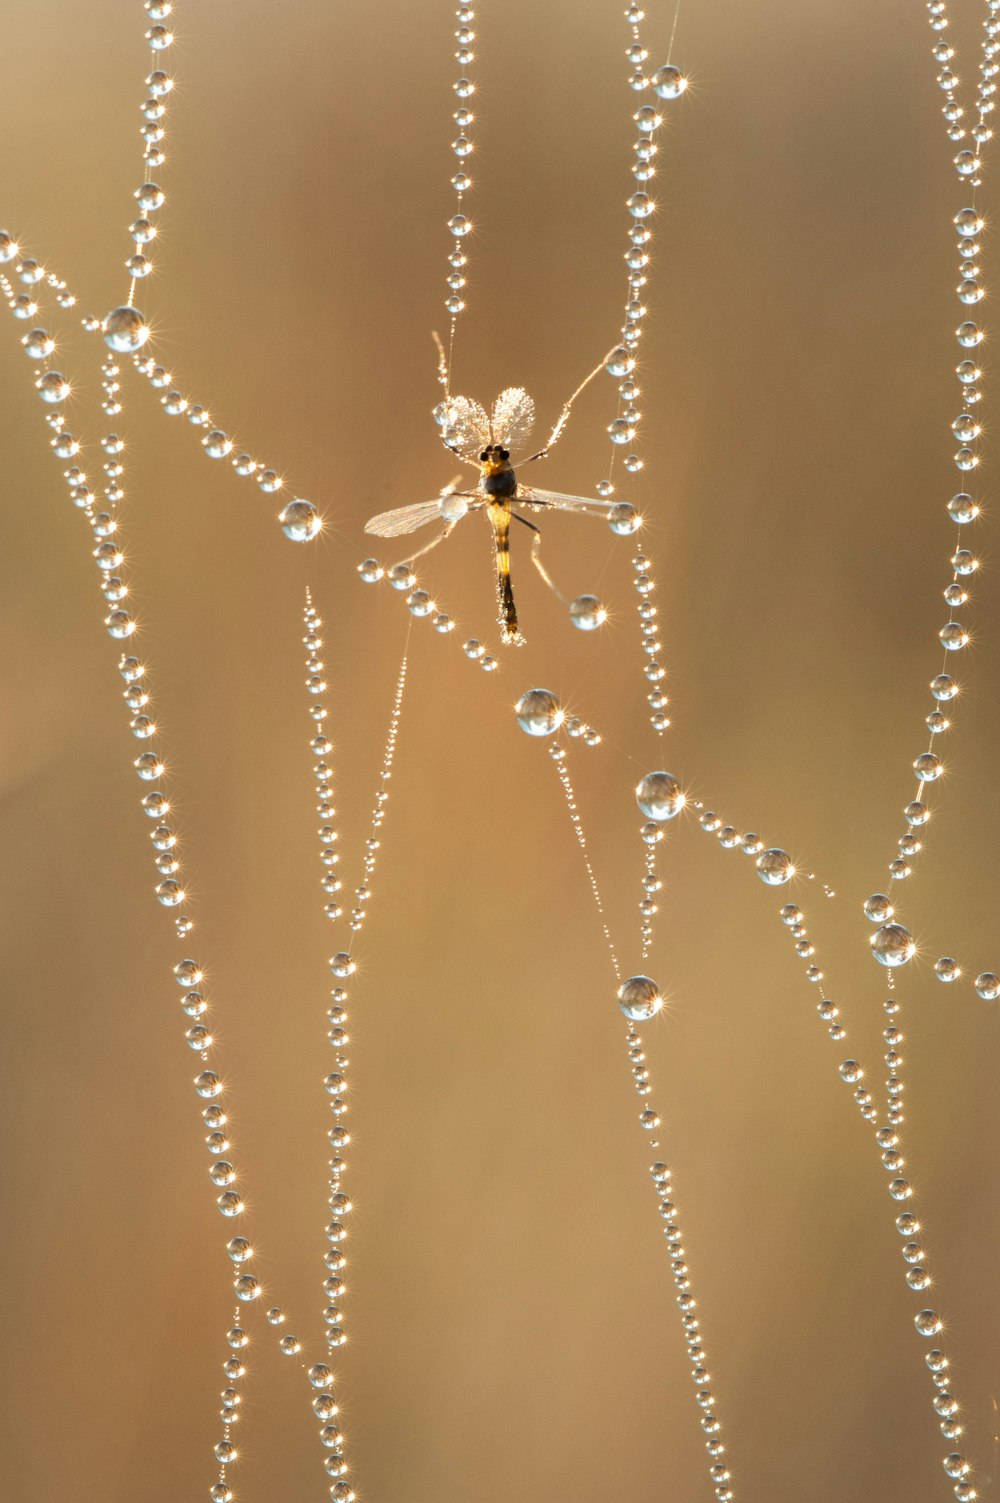 a spider sitting on top of a dew covered plant